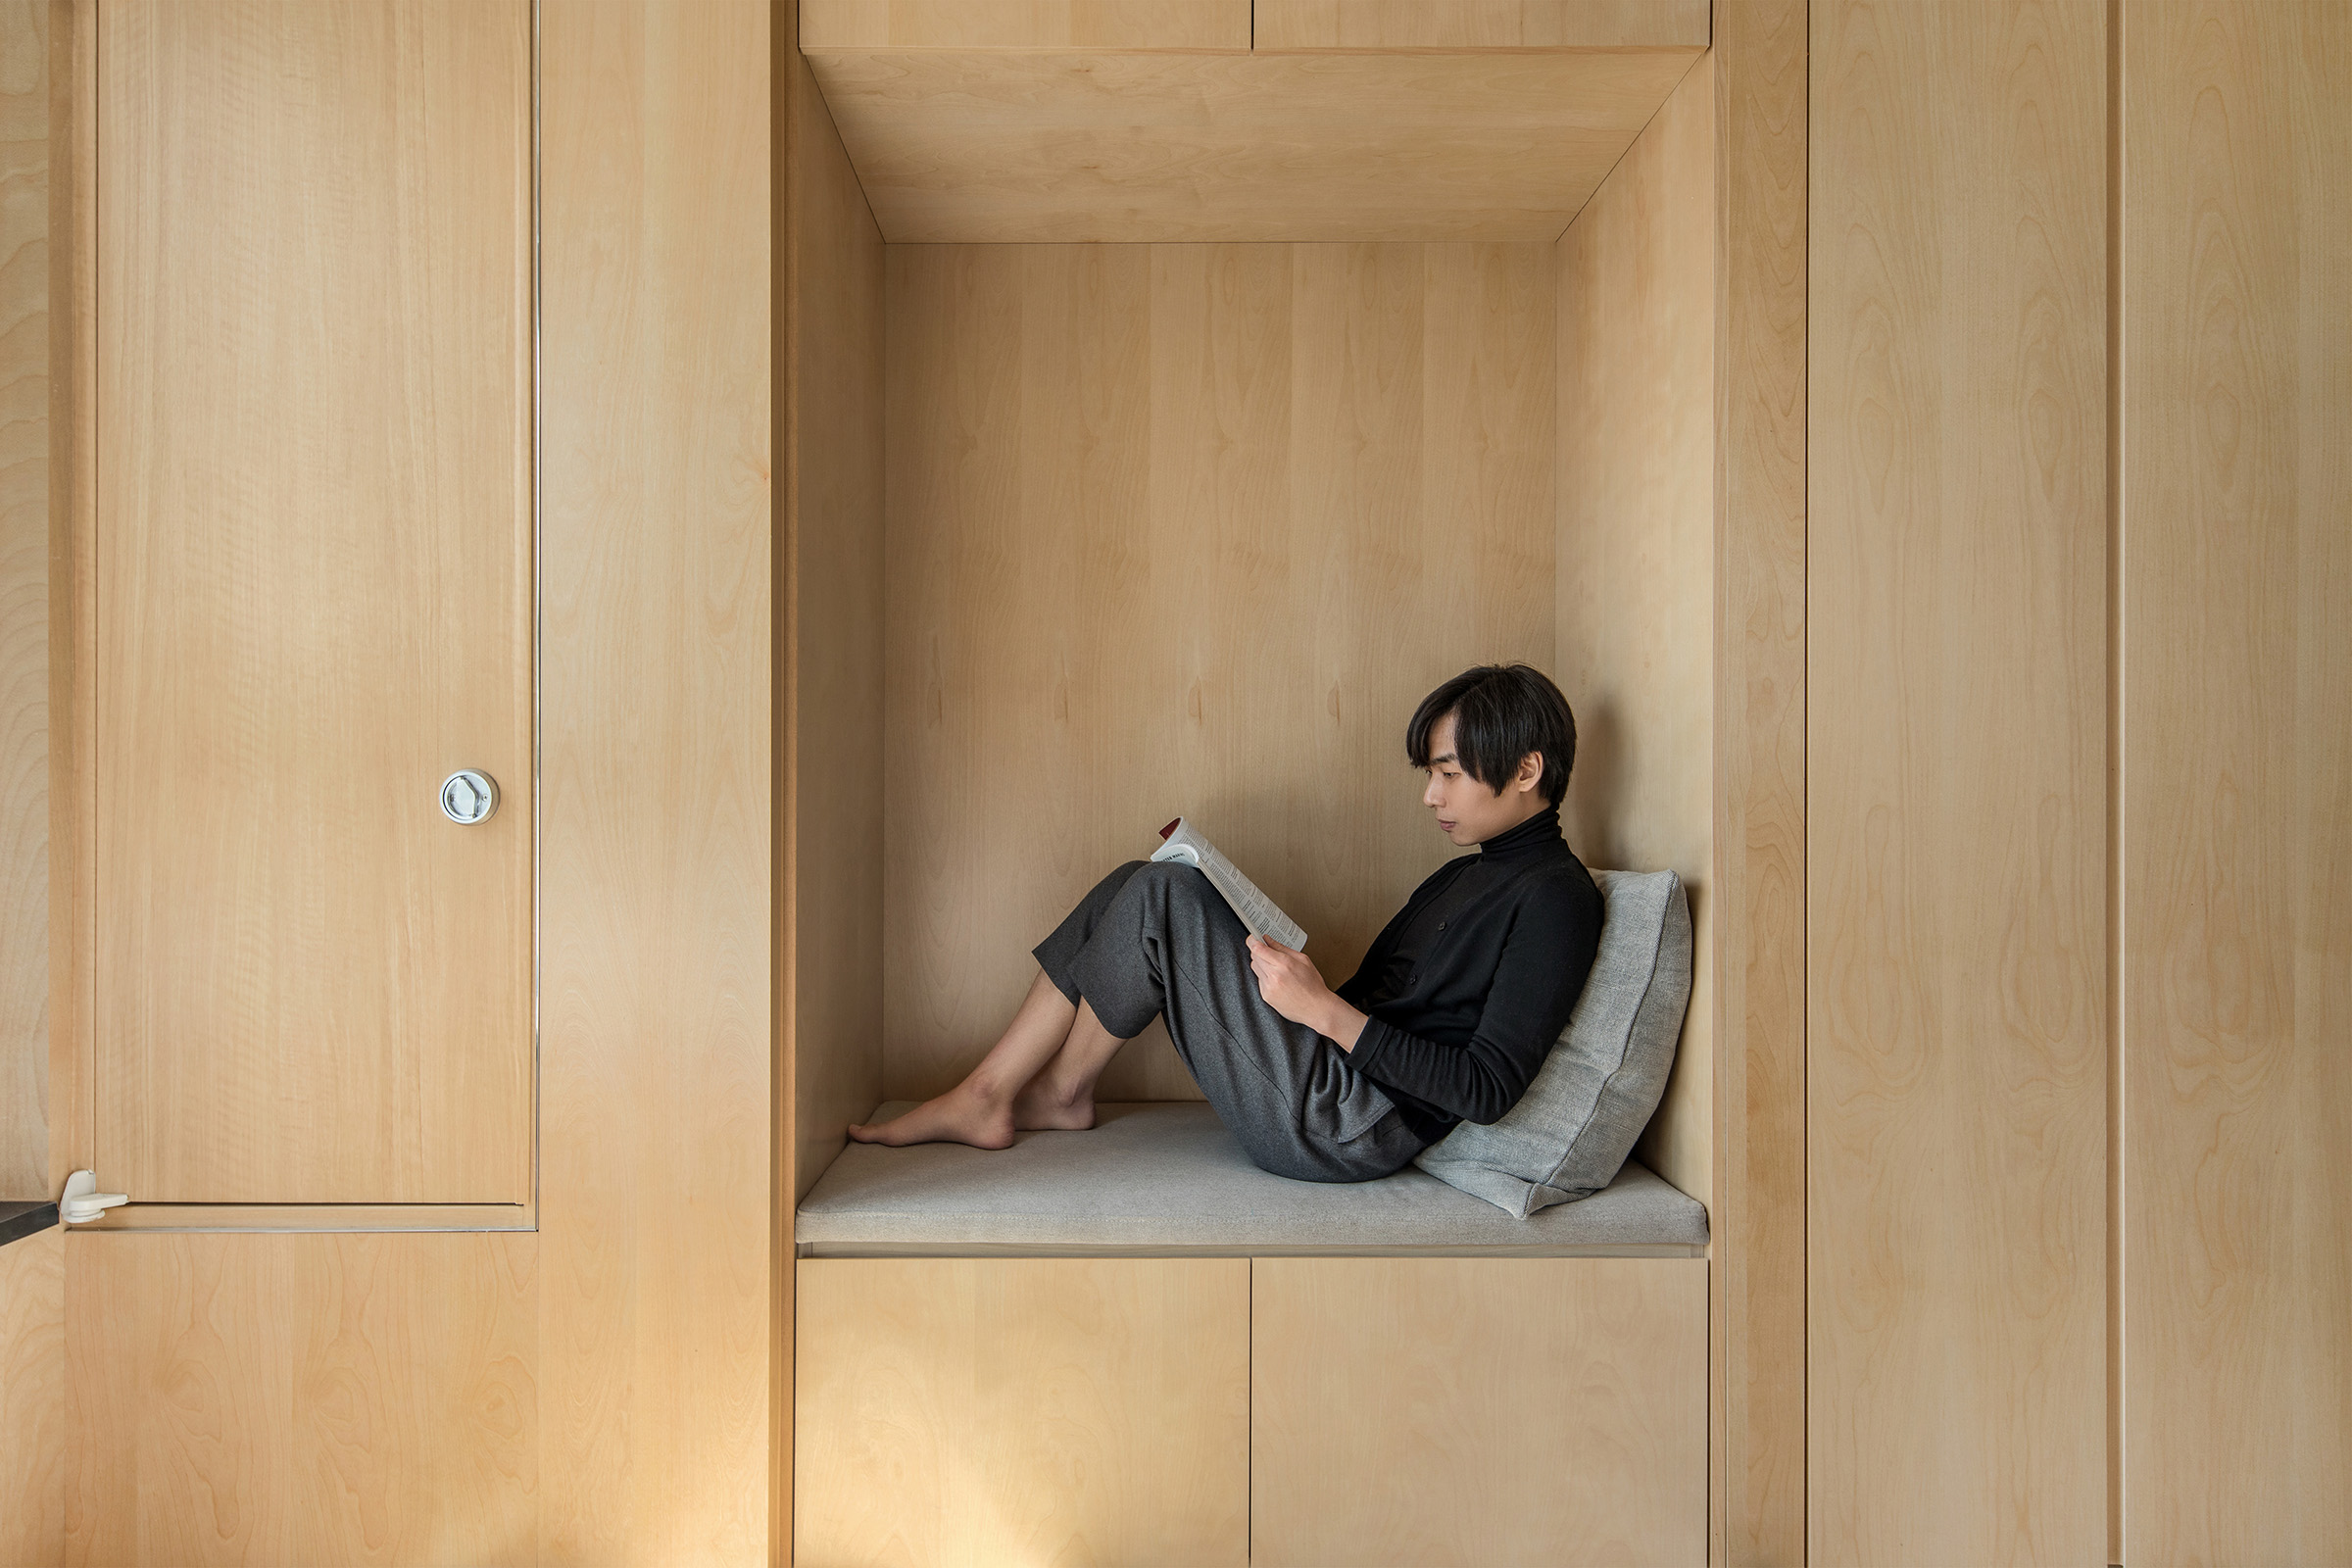 LIFE Co-Living Space | Minimal studio apartments in Seoul | Softer Volumes